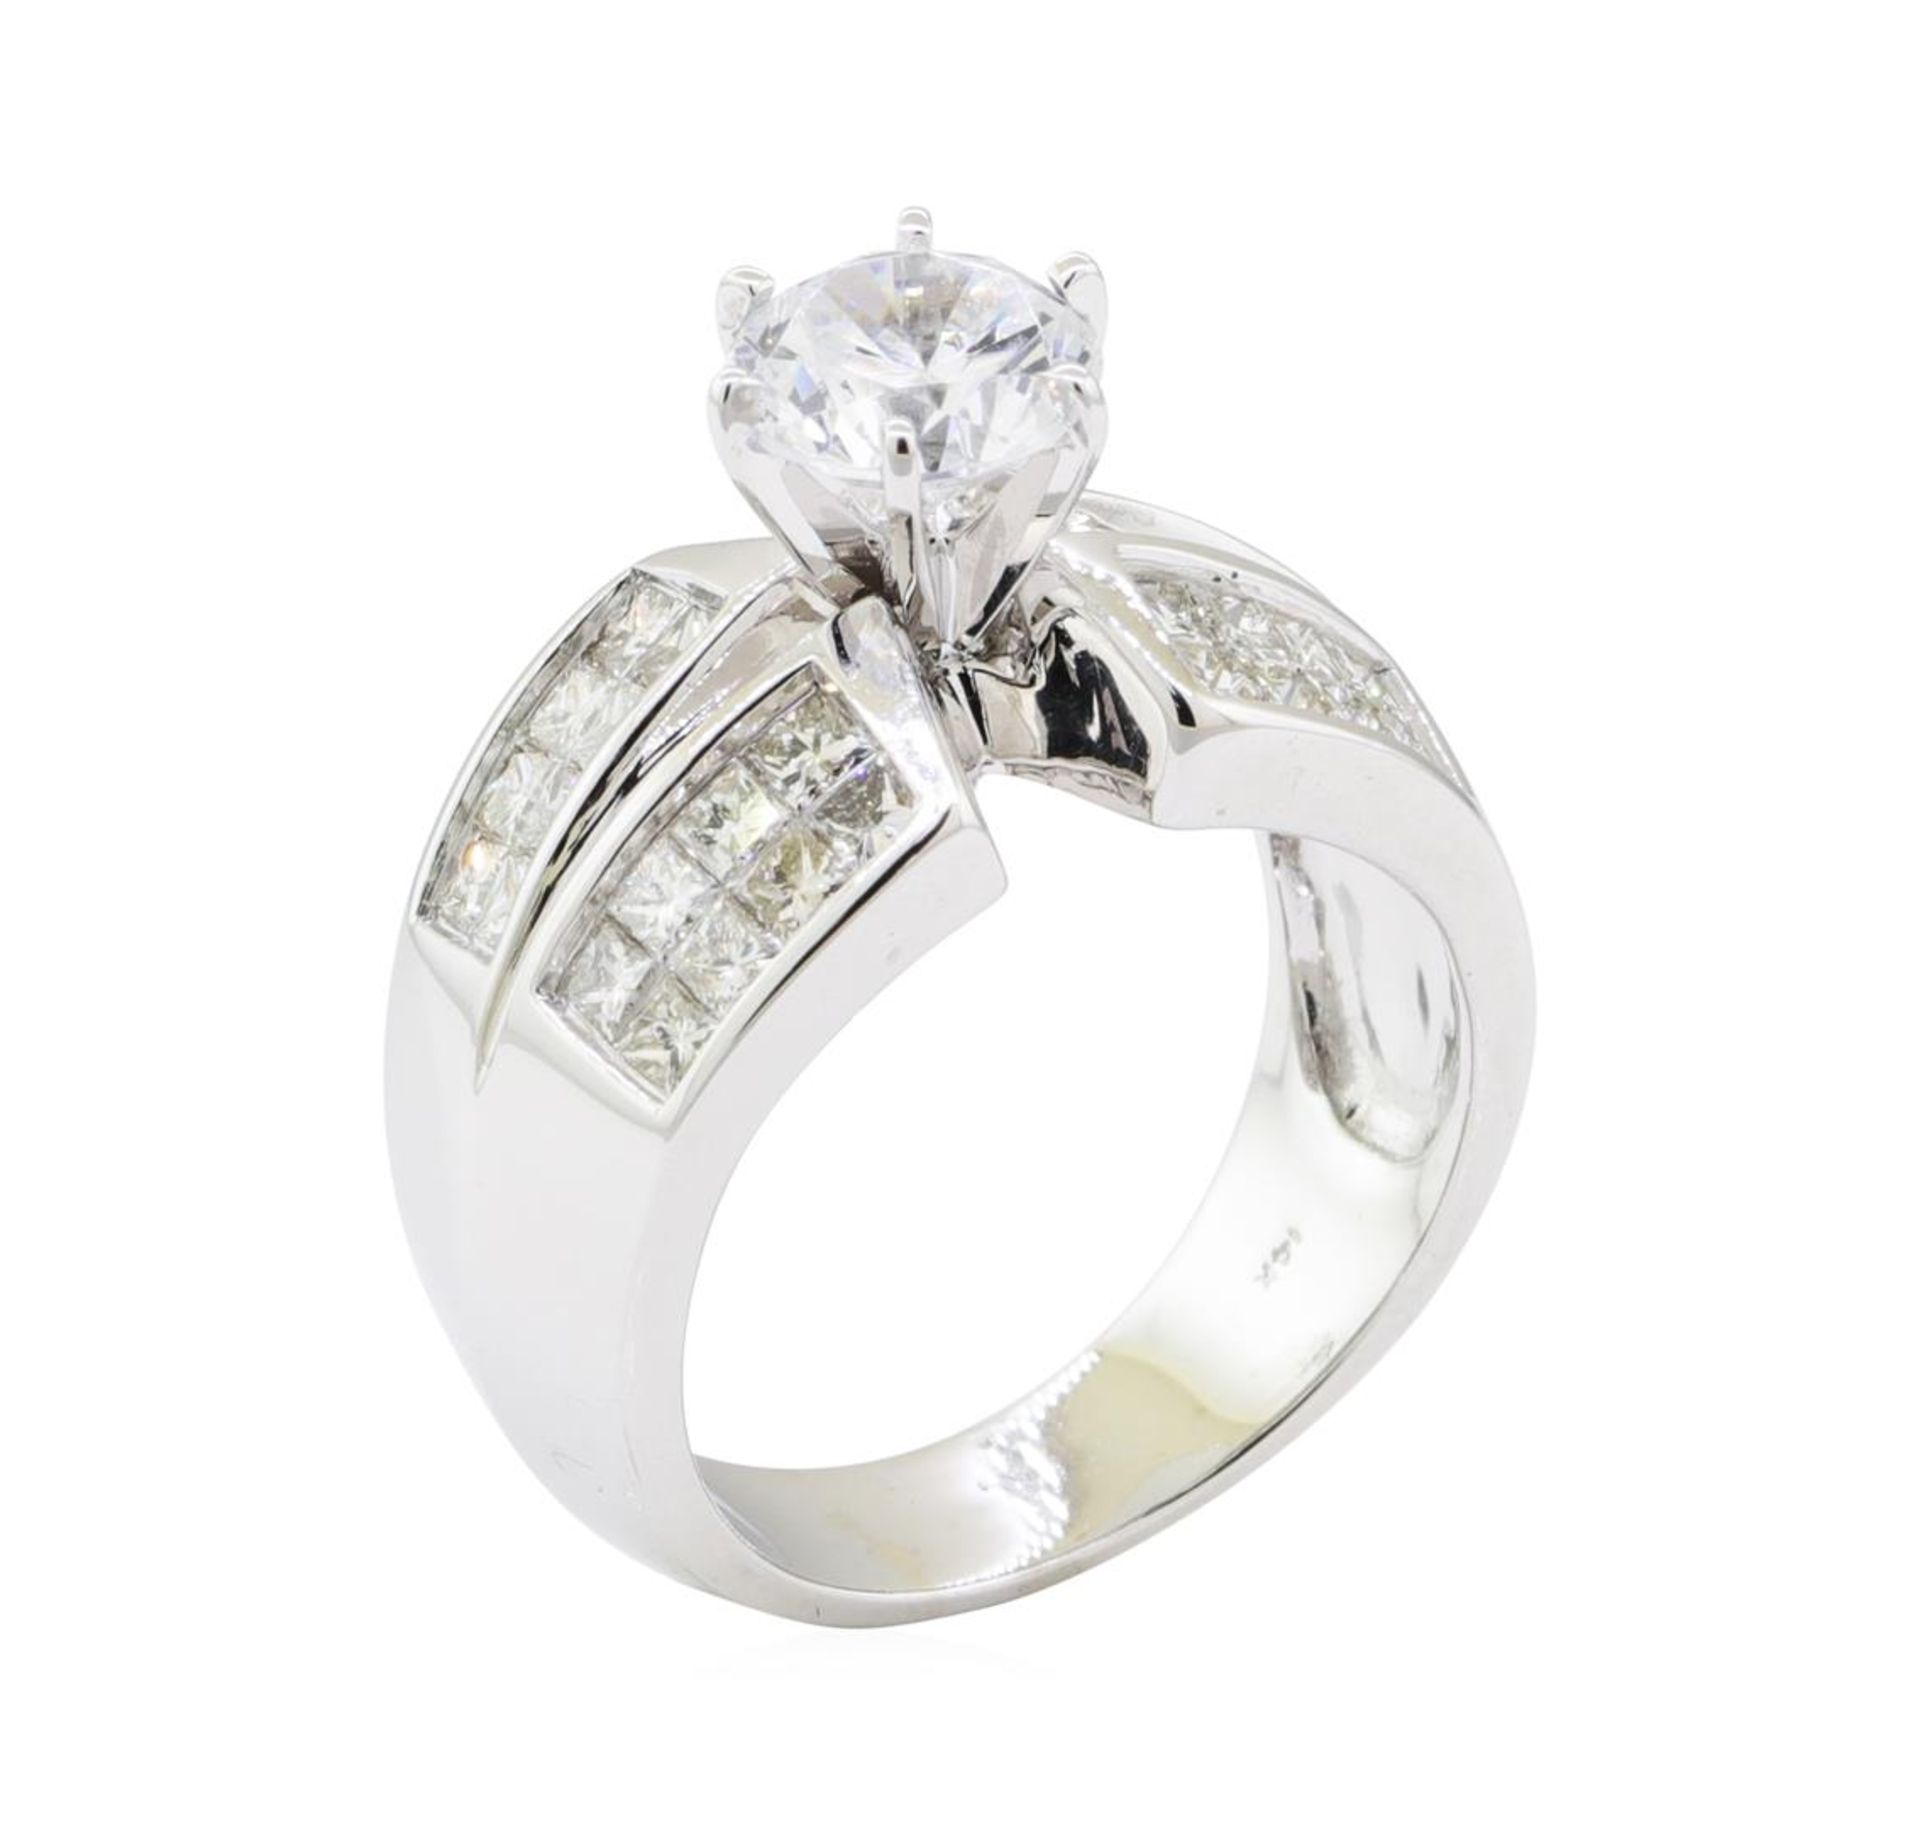 1.20 ctw Diamond Semi Mount Ring with CZ Center - 14KT White Gold - Image 4 of 4